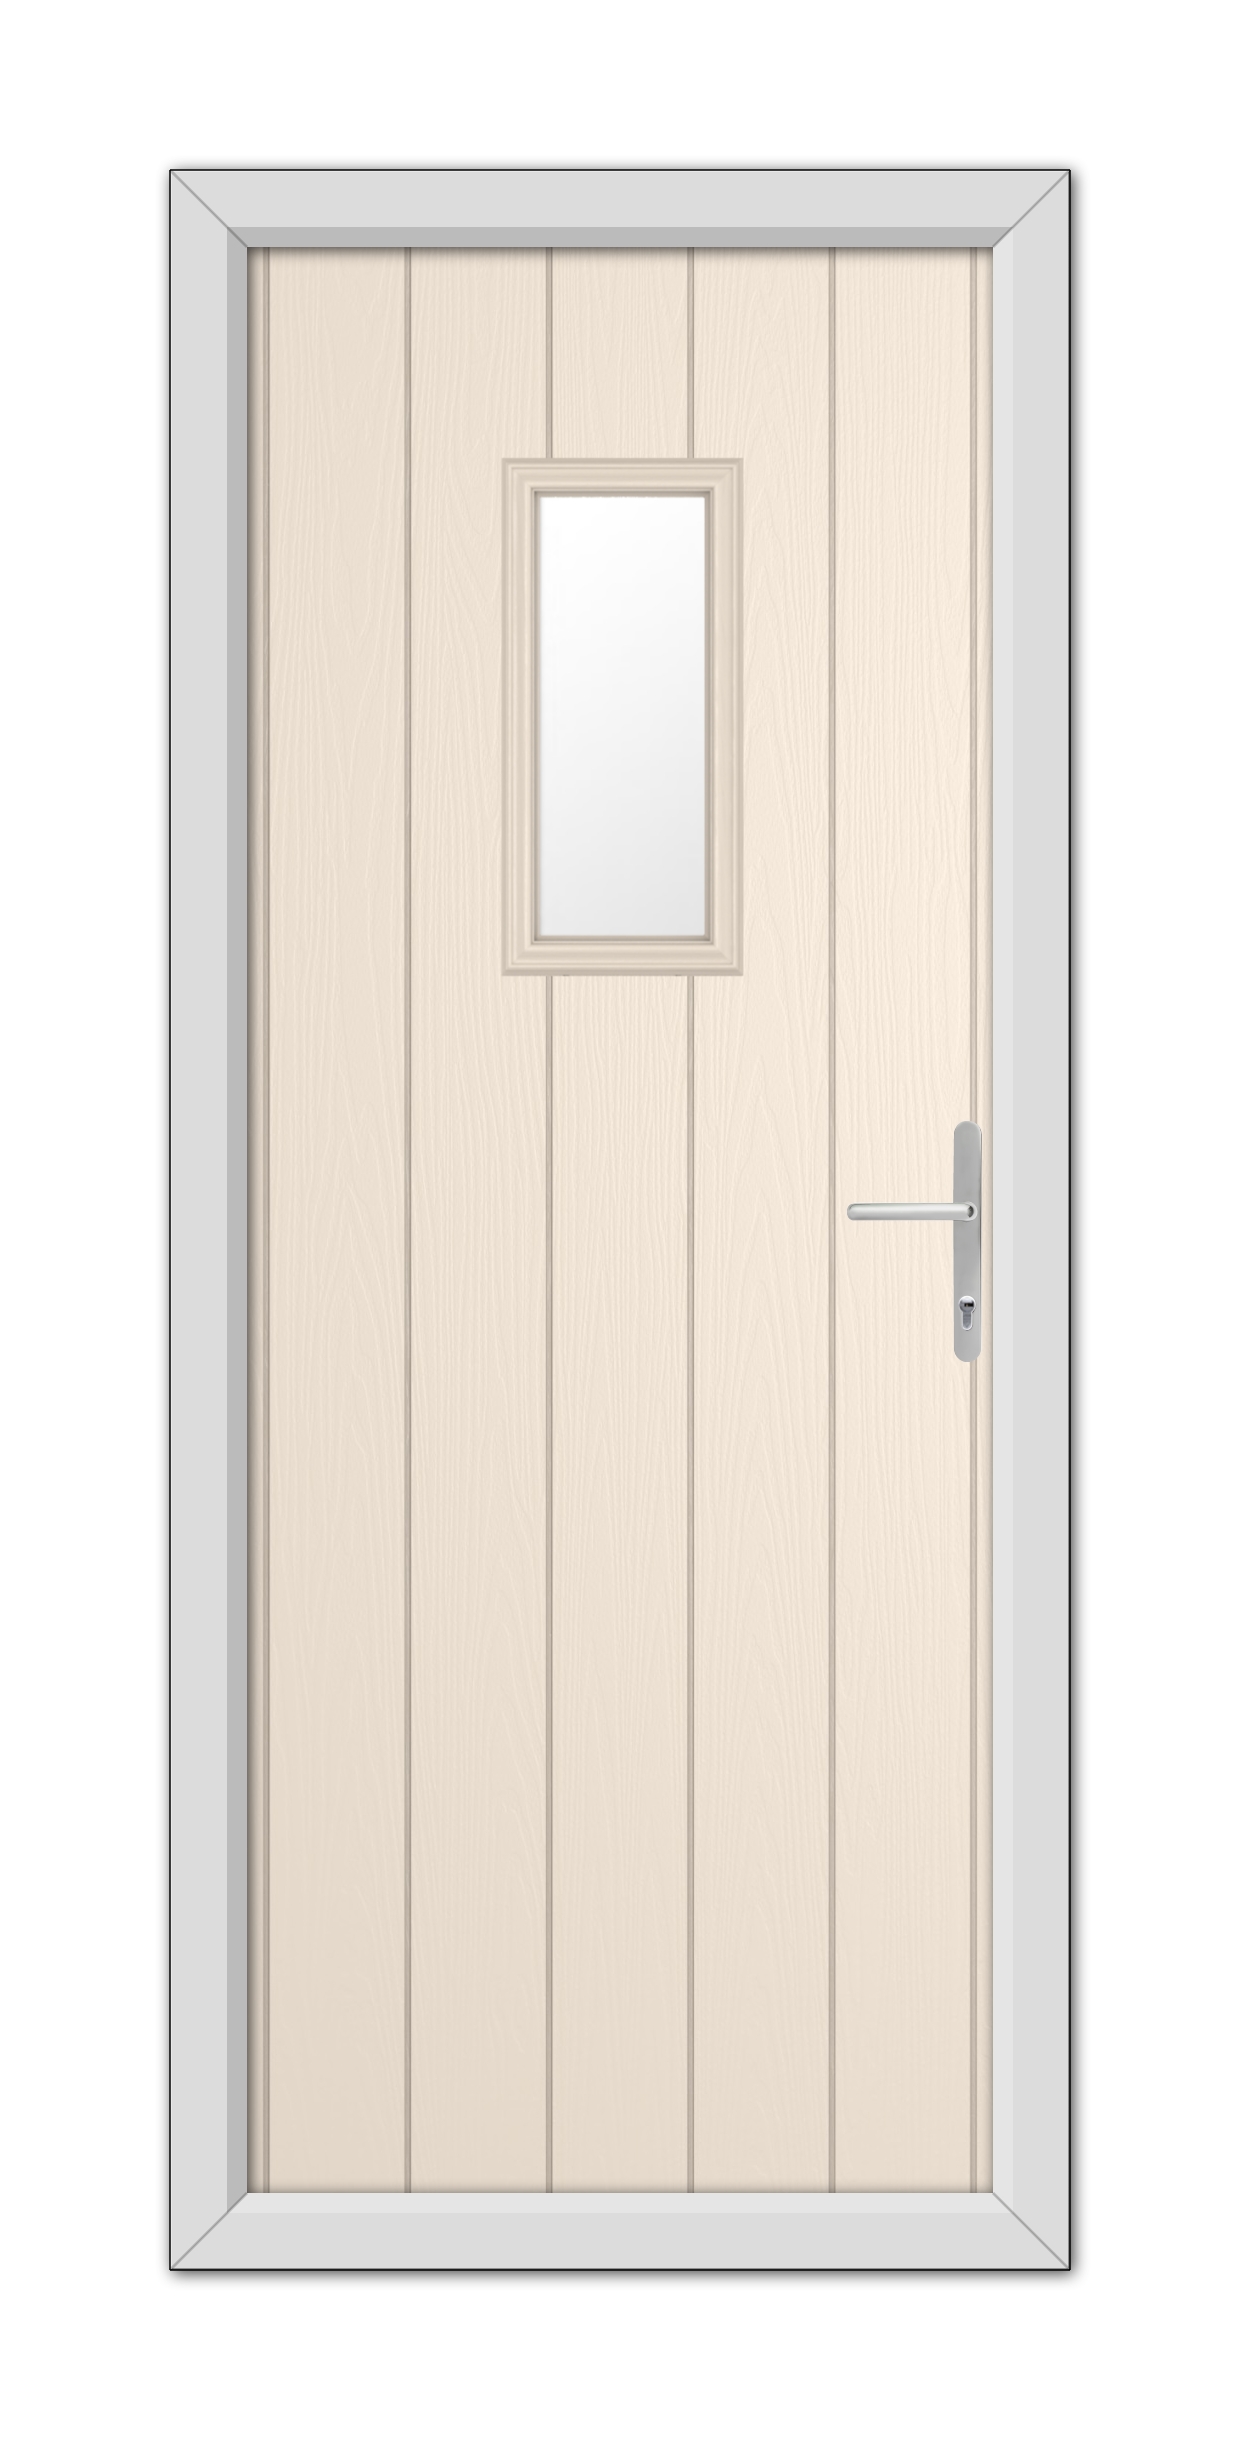 Illustration of a Cream Somerset Composite Door 48mm Timber Core with a small square window, framed by a gray casing, viewed from the front.